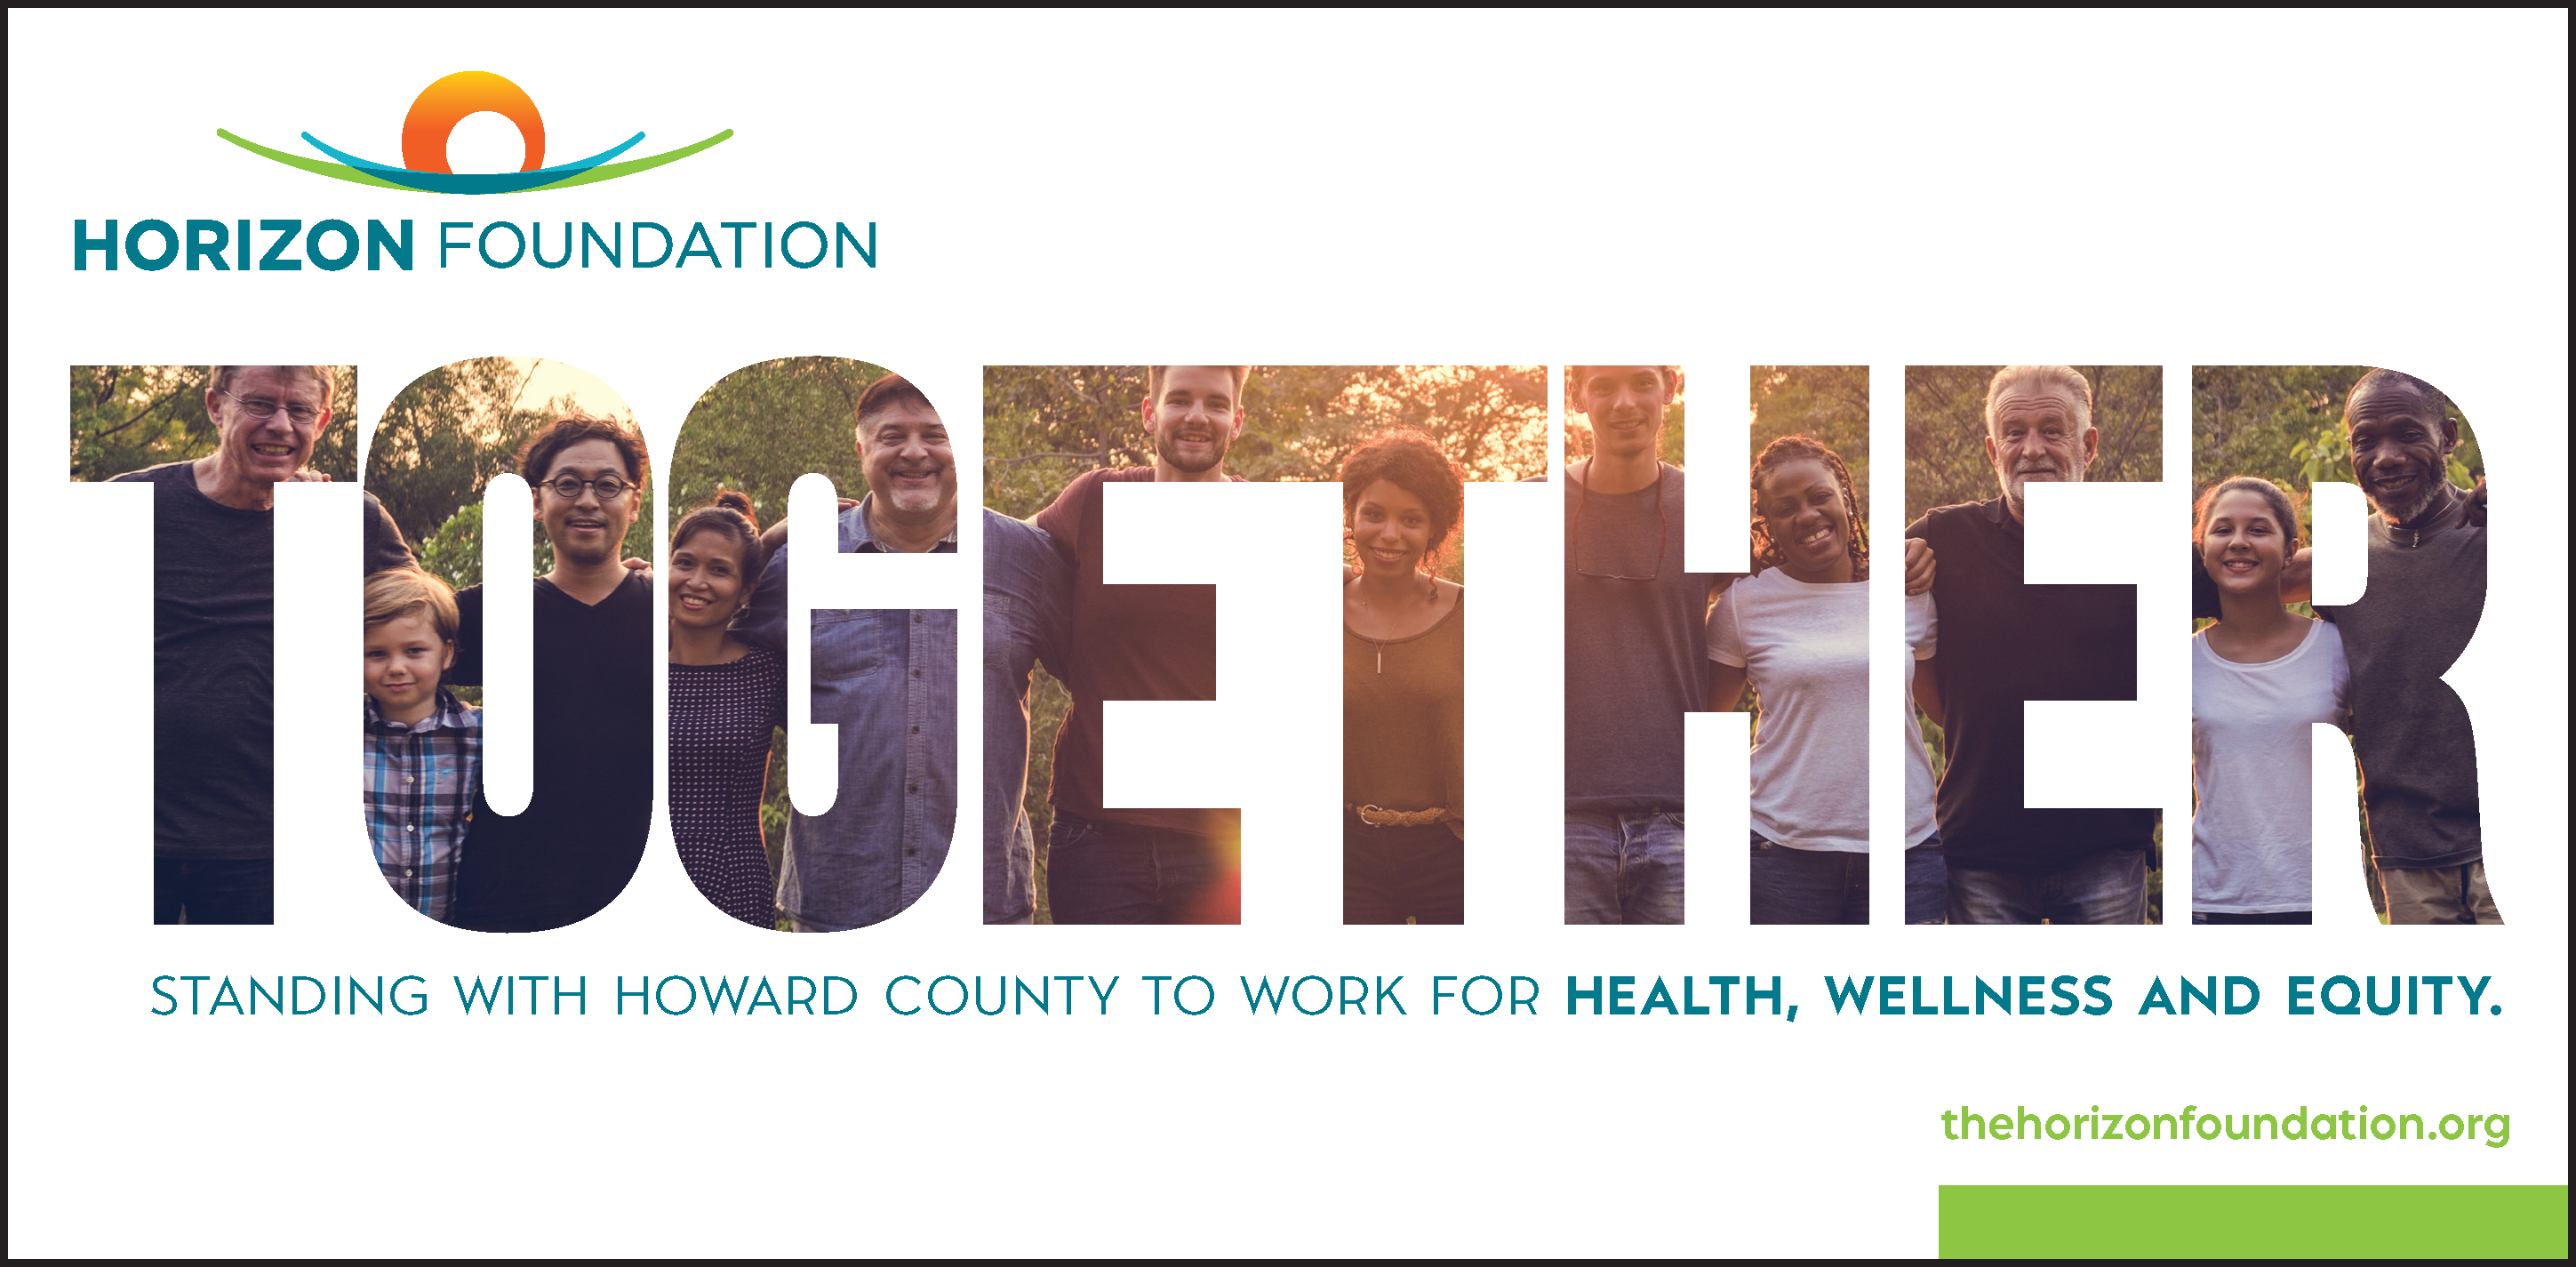 Together – for health, wellness and equity